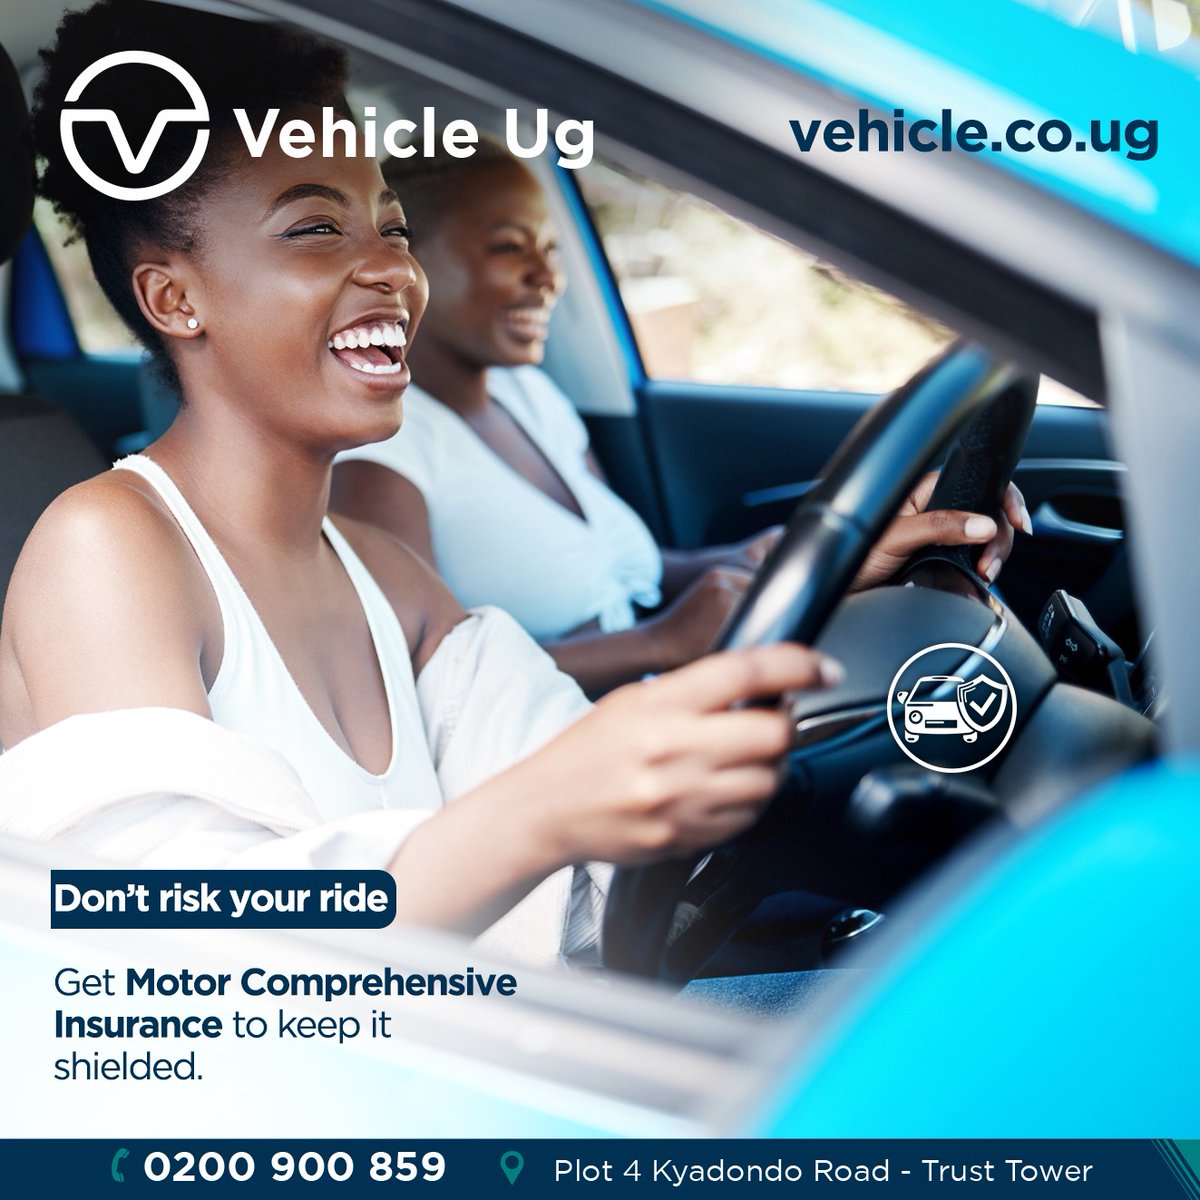 Step into the new week with a Motor Comprehensive Insurance and safe guard your car.

#VehicleInsurance #MondayMotivation #MotorComprehensive